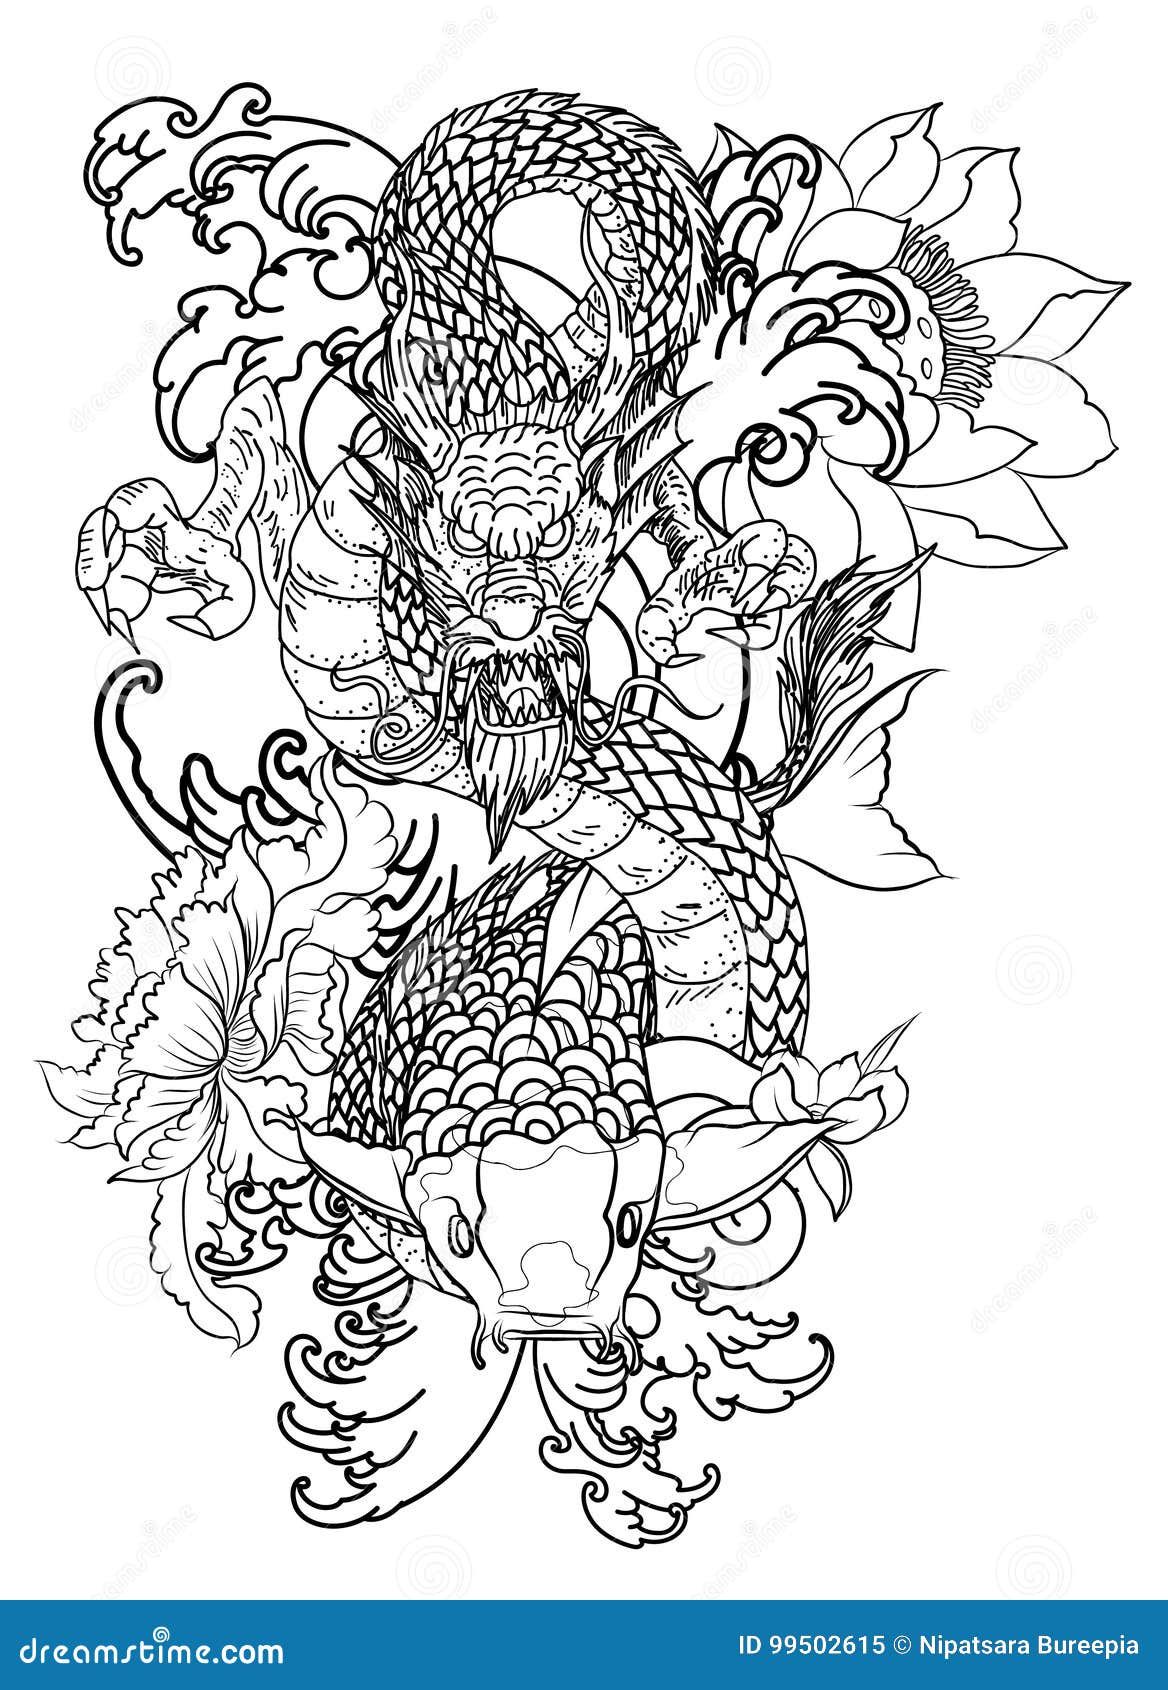 How To Draw A Chinese Dragon Tattoo Step by Step Drawing Guide by Dawn   DragoArt